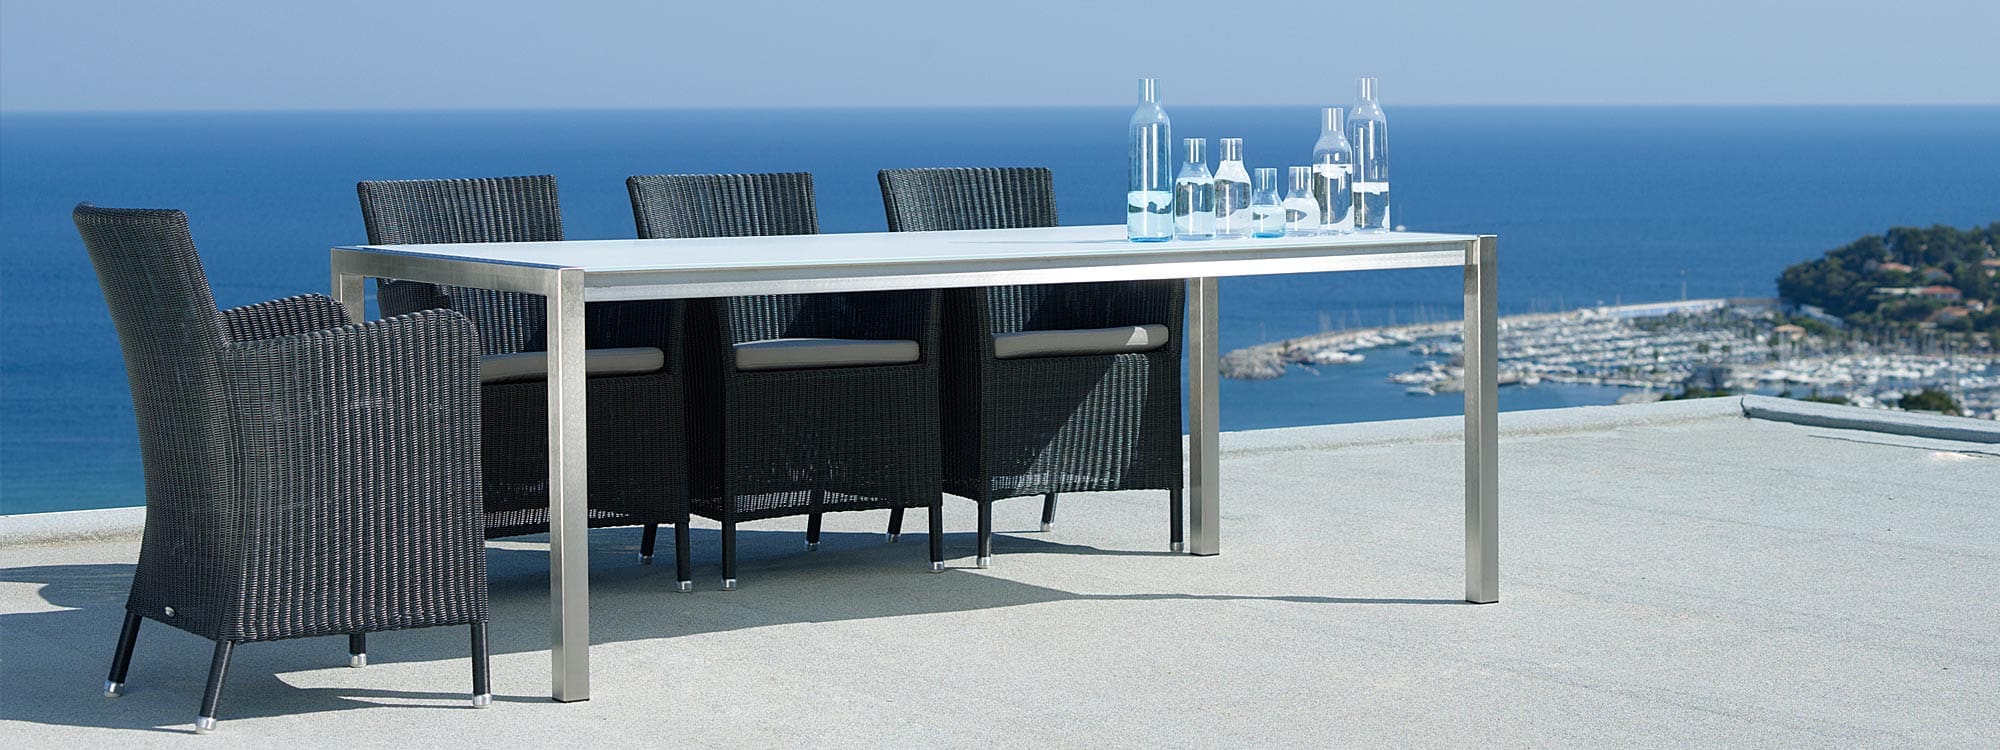 Image of Hampsted black whicker garden chairs on sunny terrace around Caneline dining table with port and sea in background